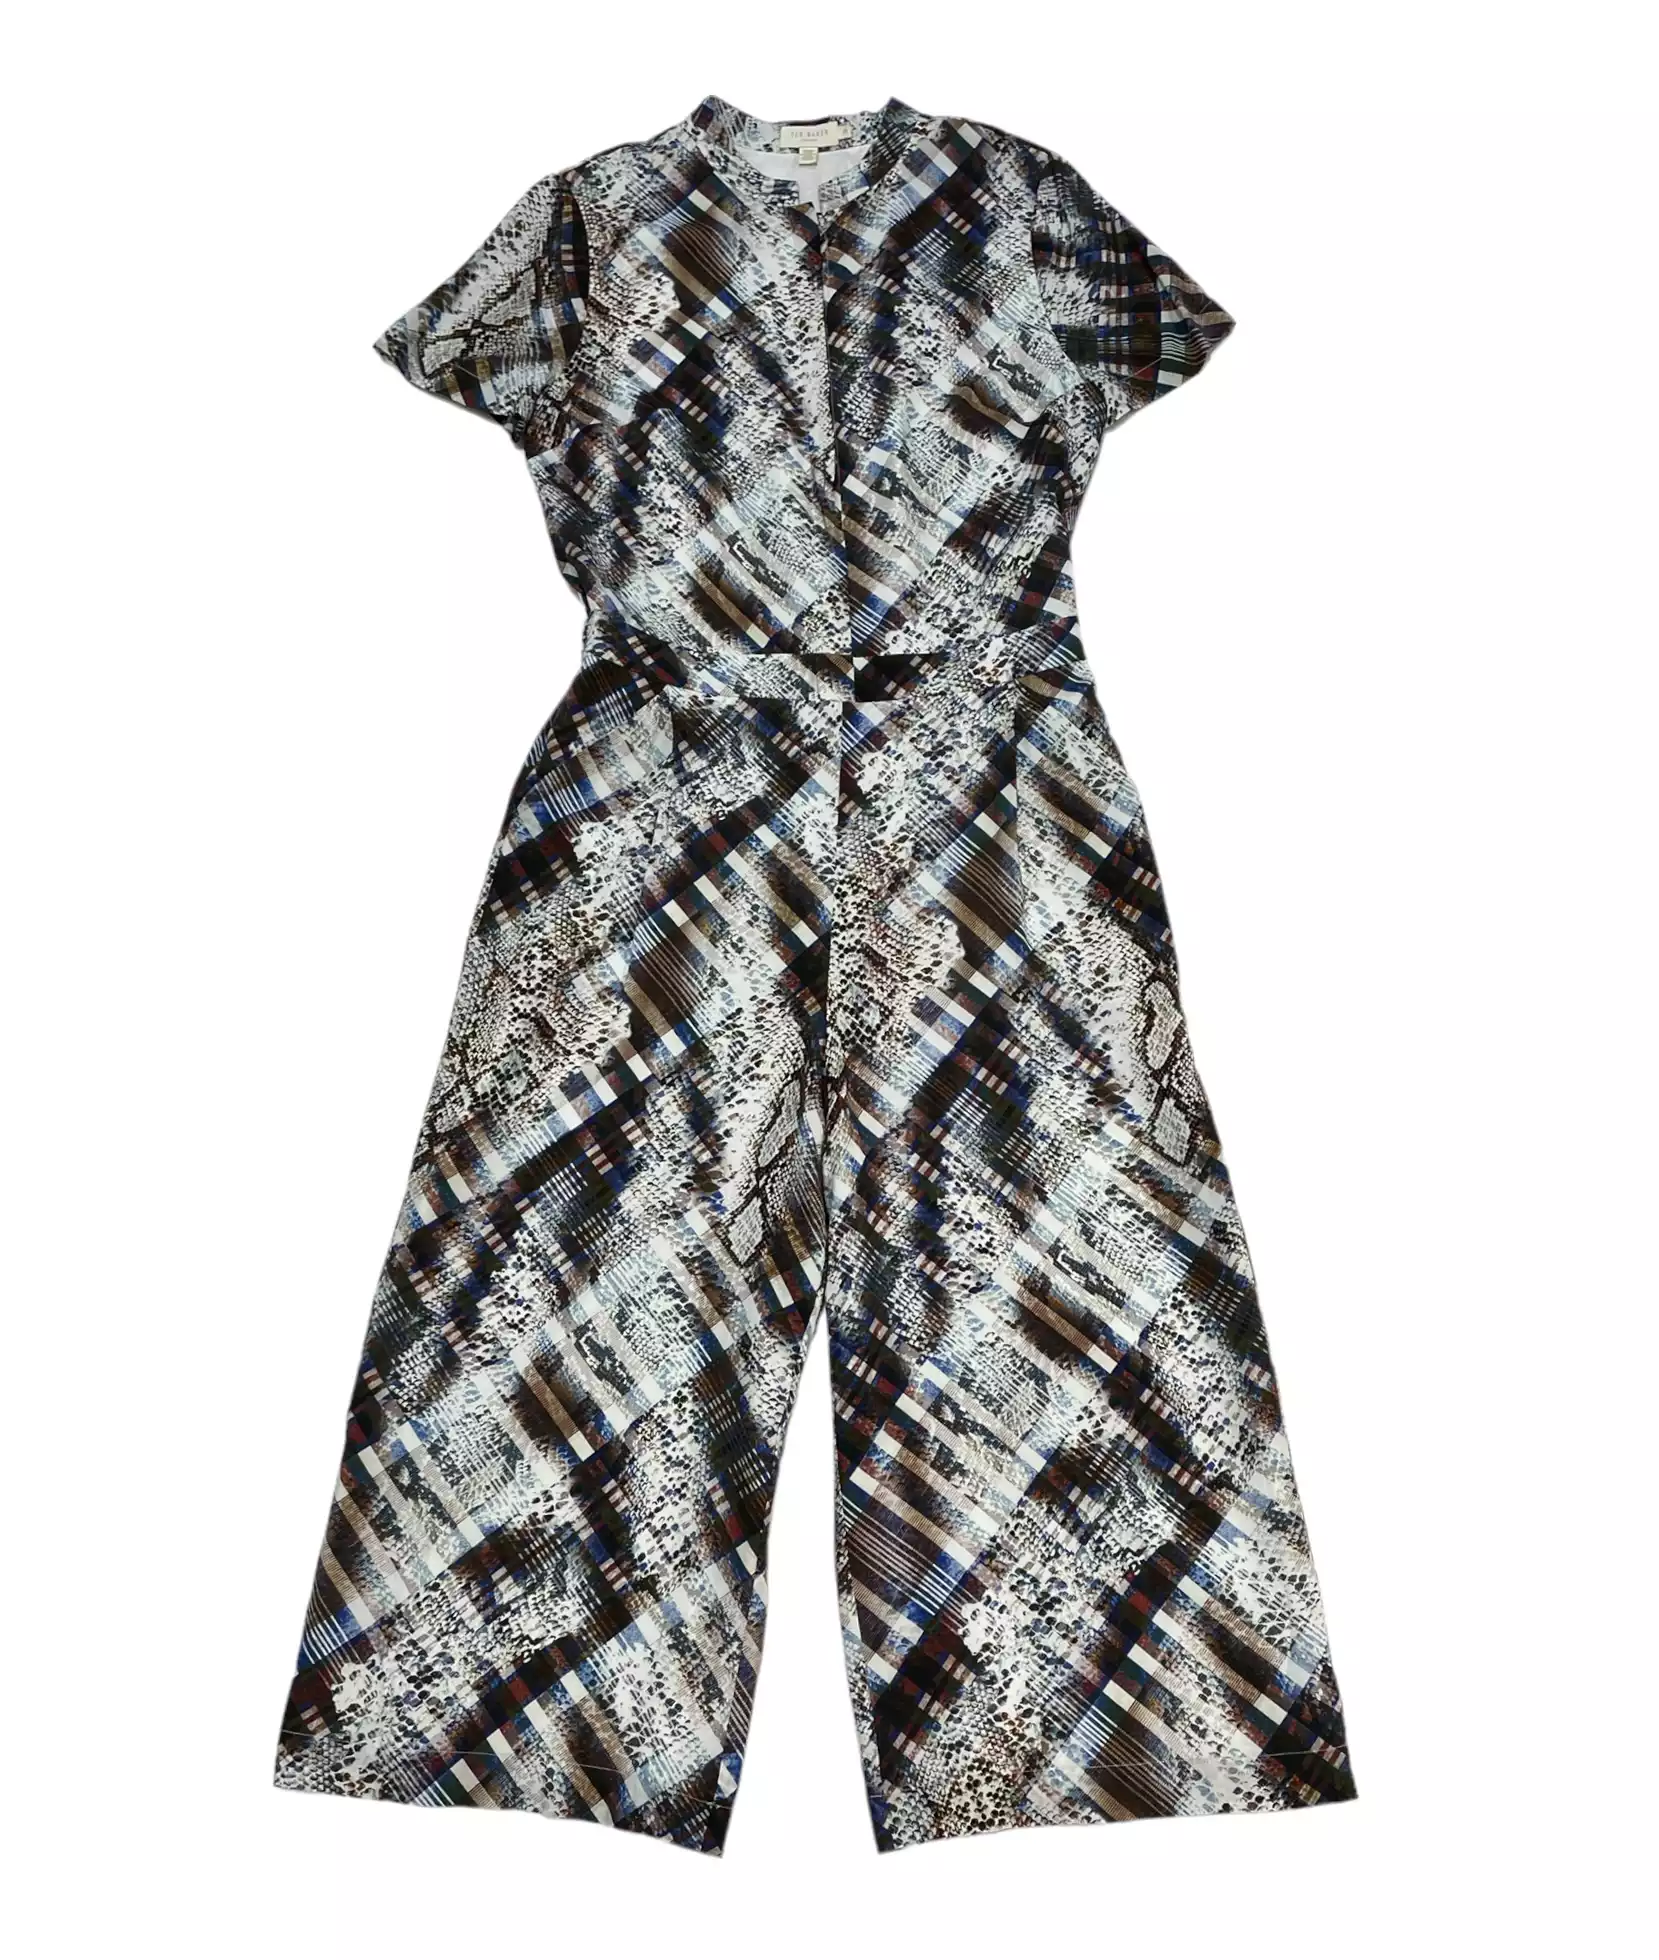 Jumpsuit by Ted Baker